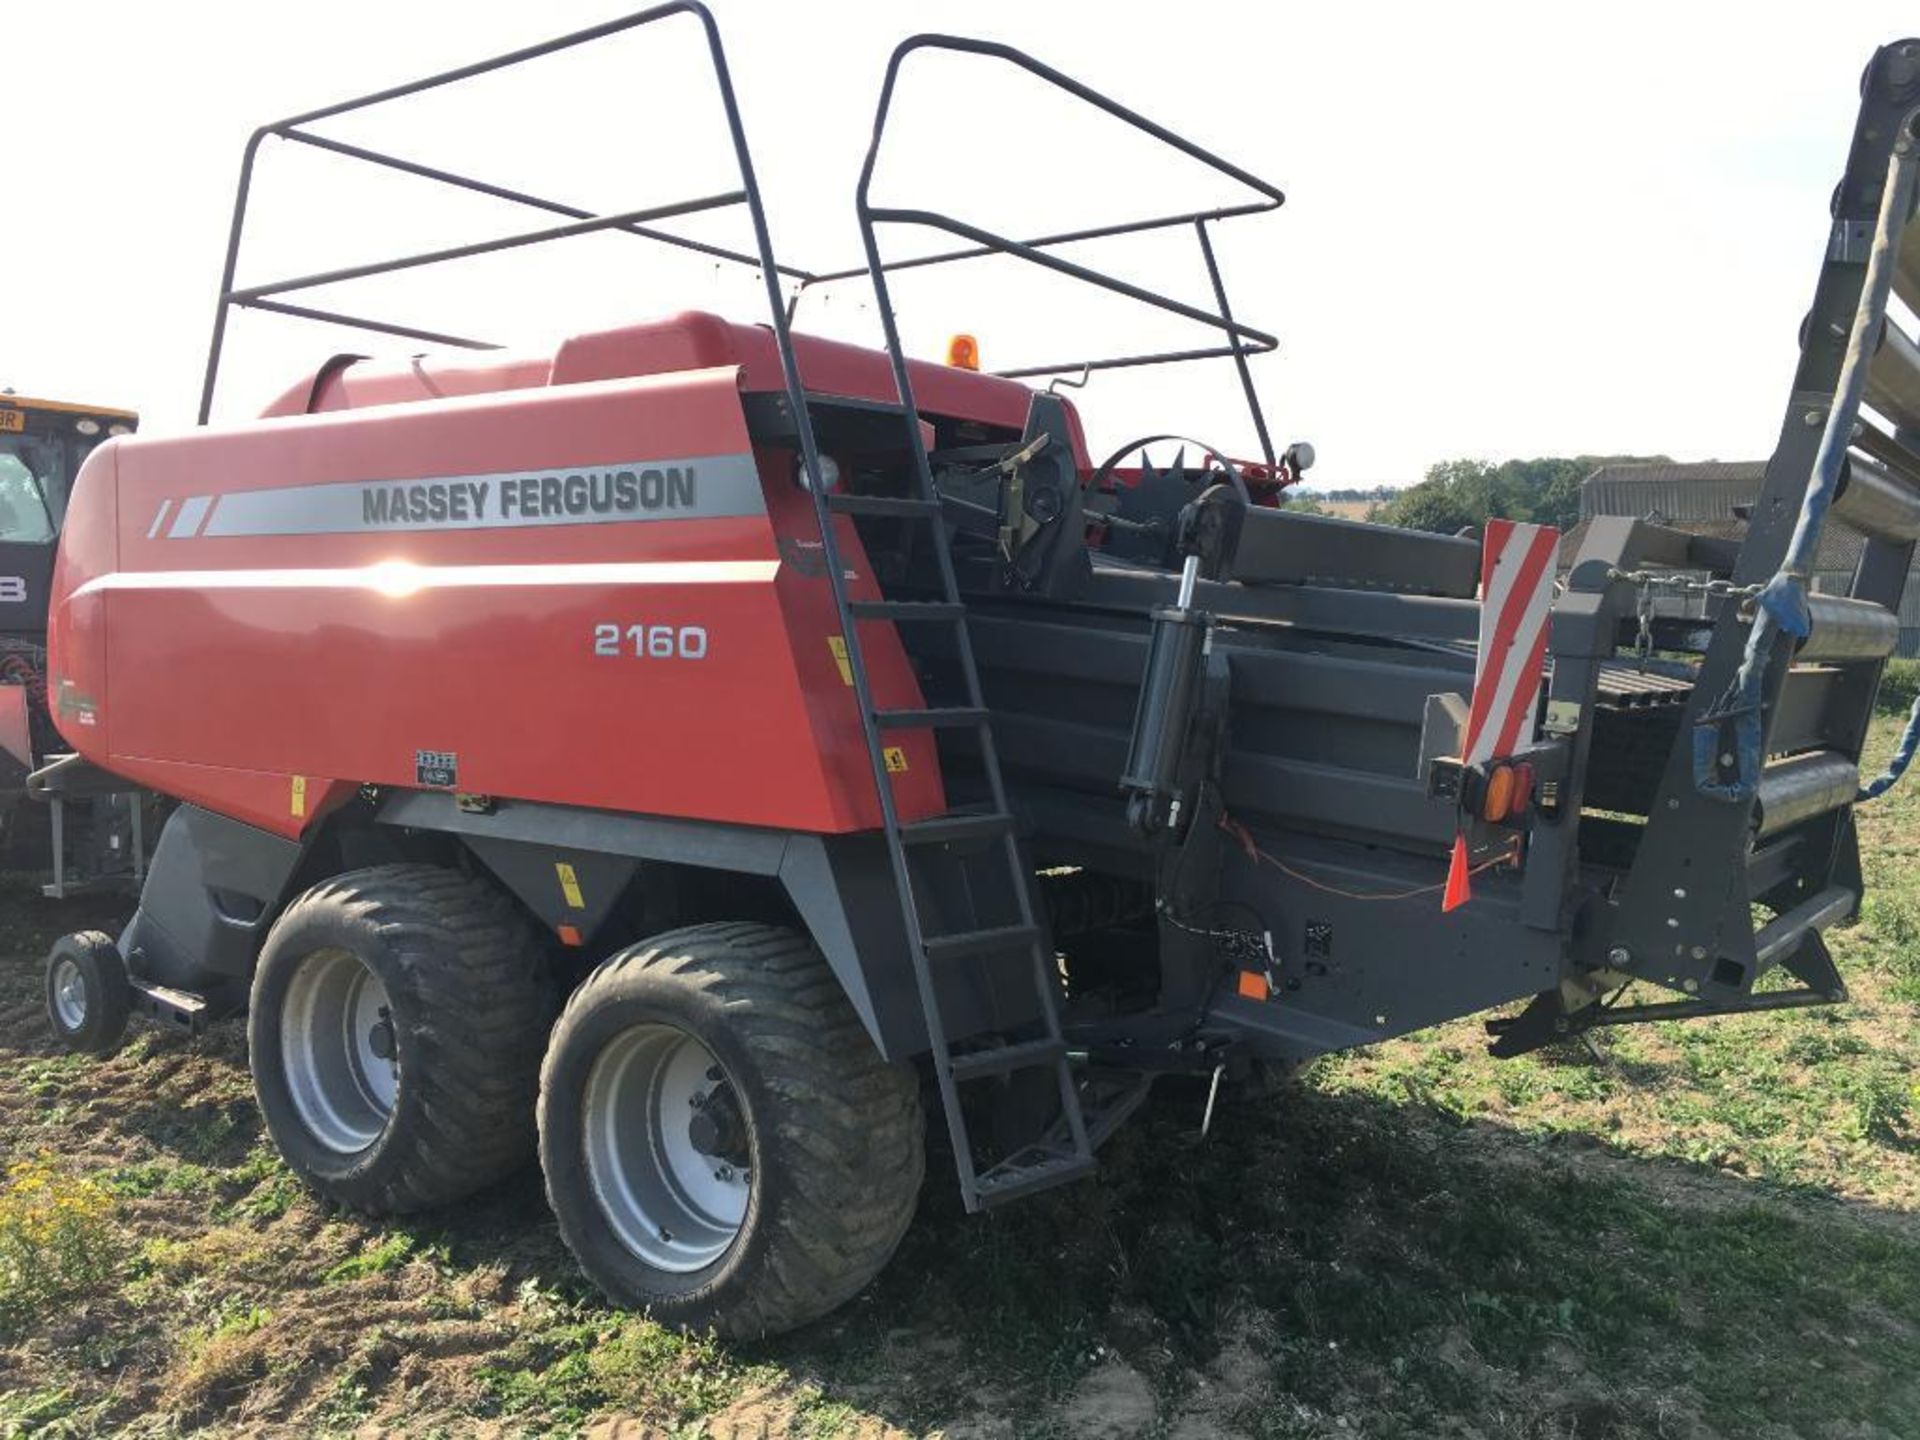 2008 Massey Ferguson MF2160 Big Baler twin axle with air and hydraulic brakes, 70x120 bale size. Ser - Image 29 of 32